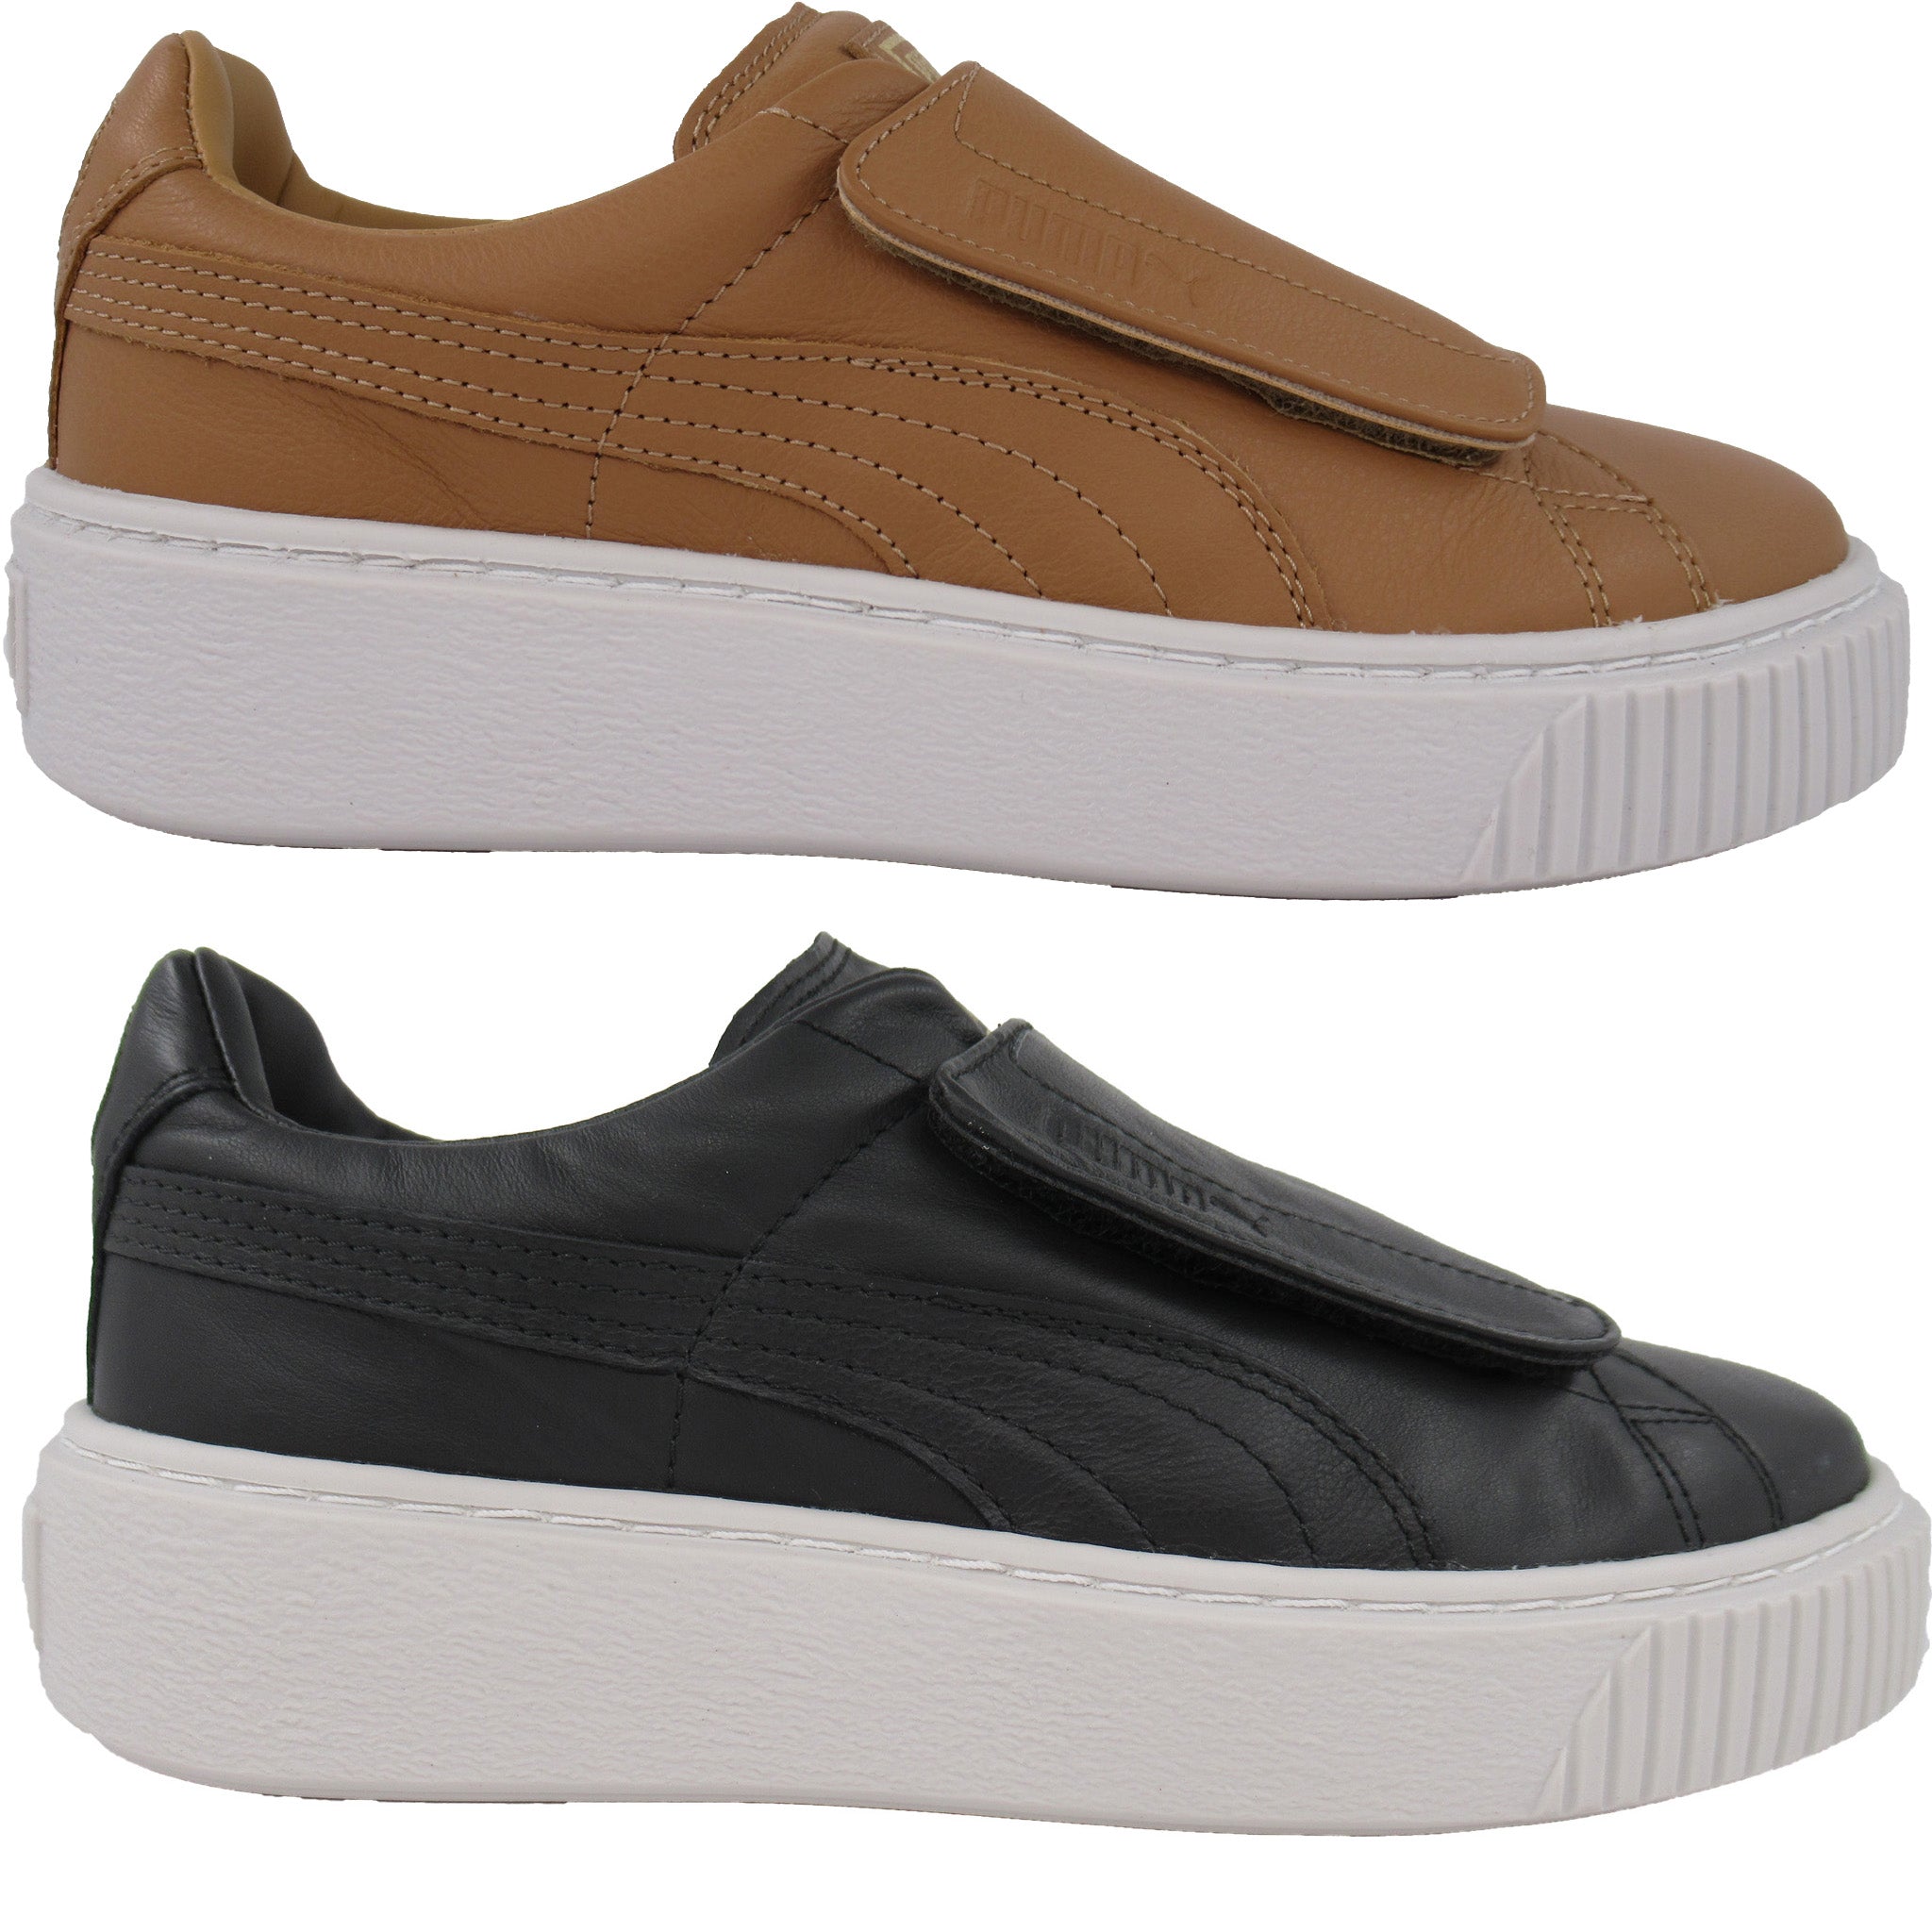 Puma Women's Platform – That Shoe Store and More